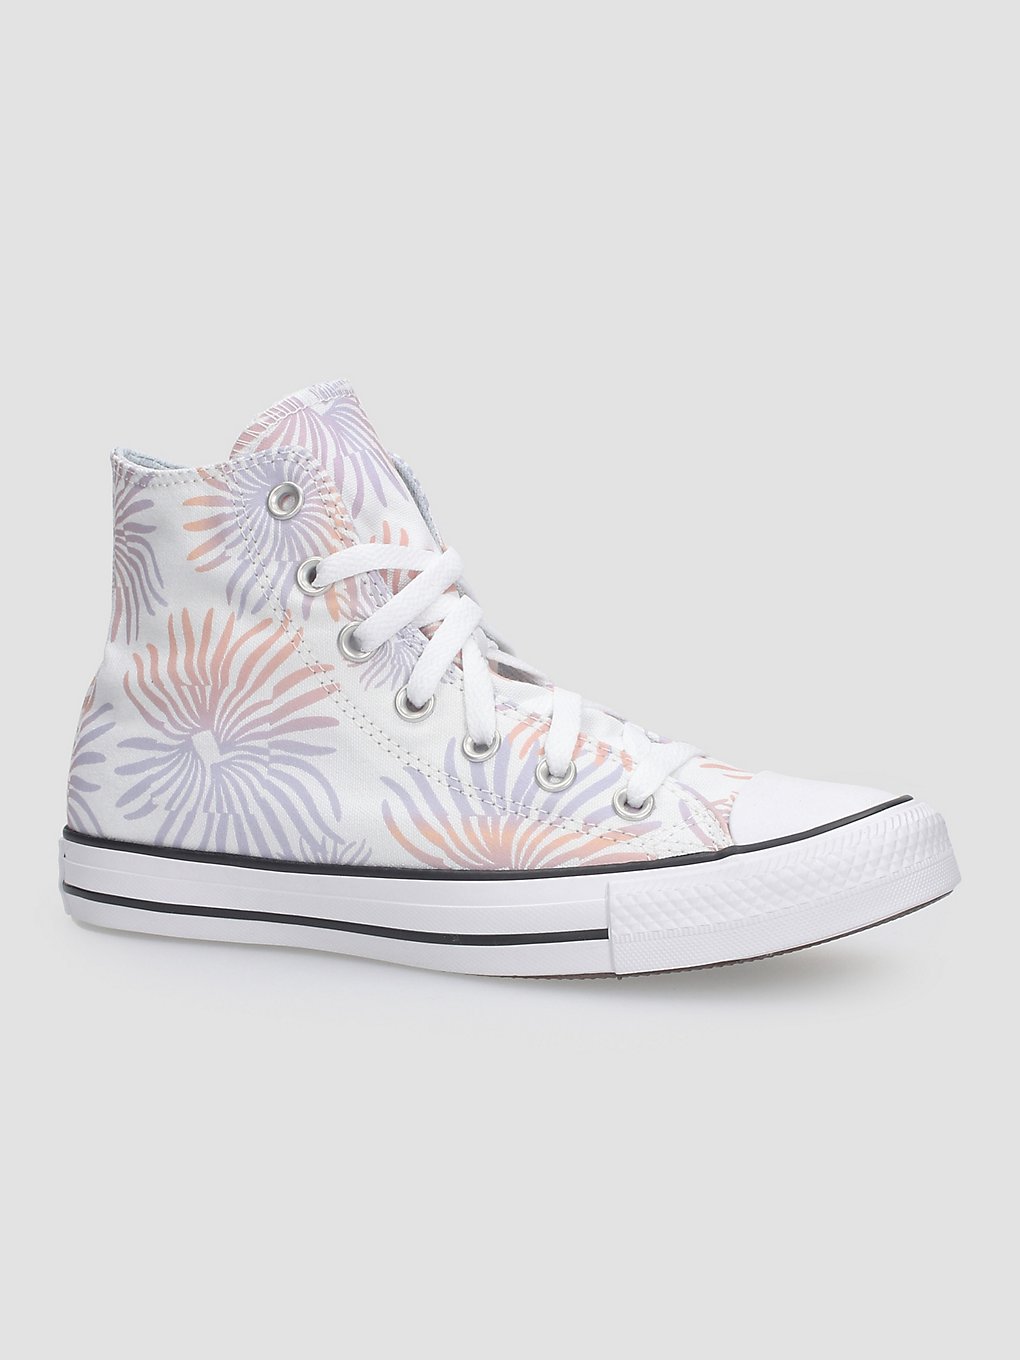 Converse Chuck Taylor All Star Floral Sneakers patroon